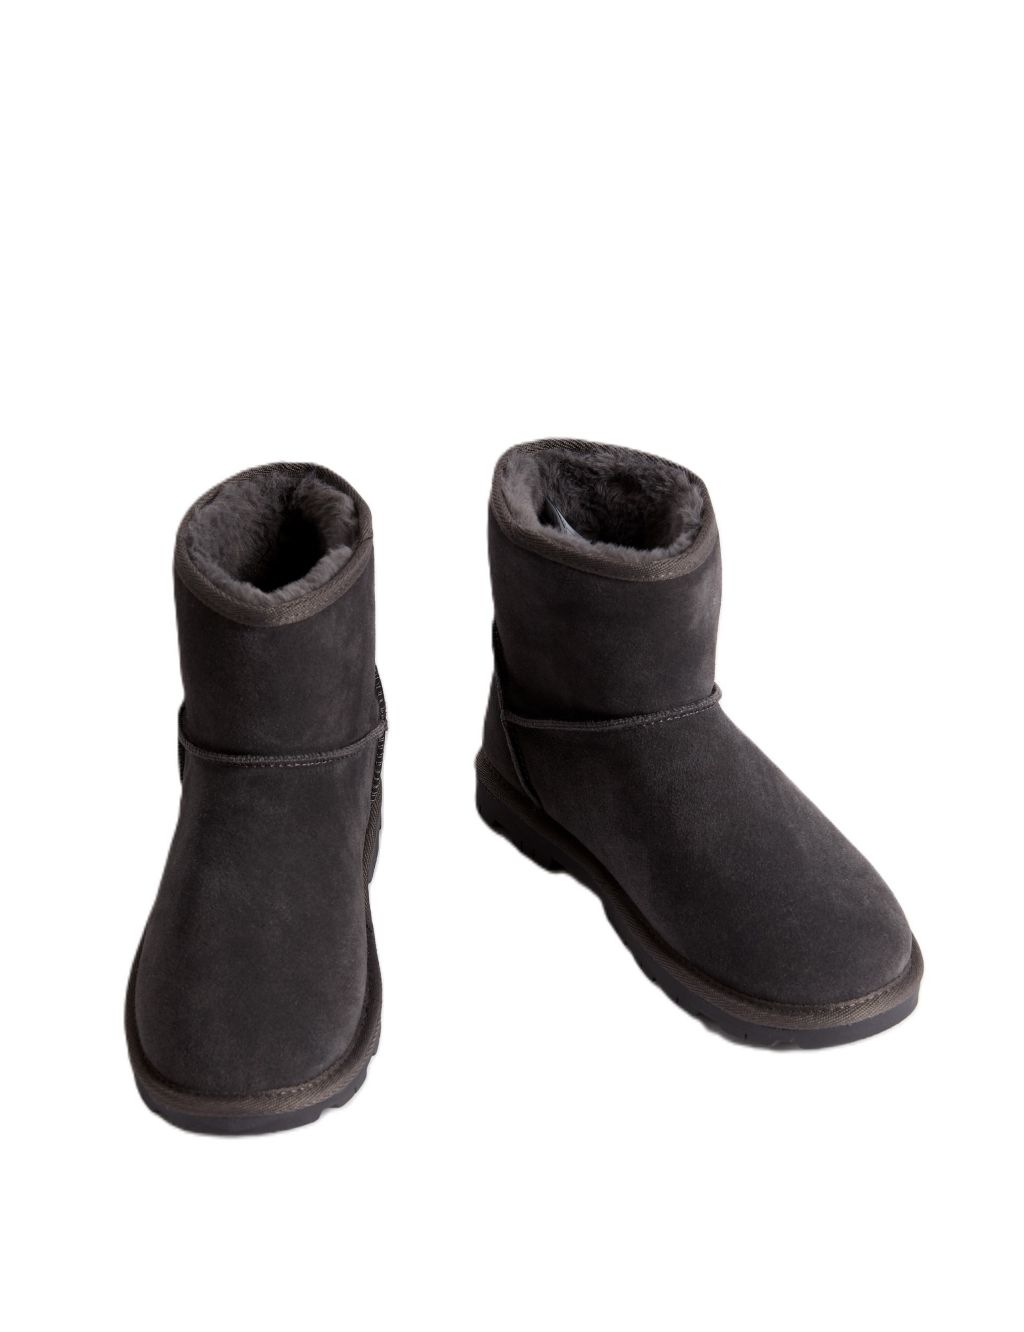 Suede Faux Fur Lined Slipper Boots